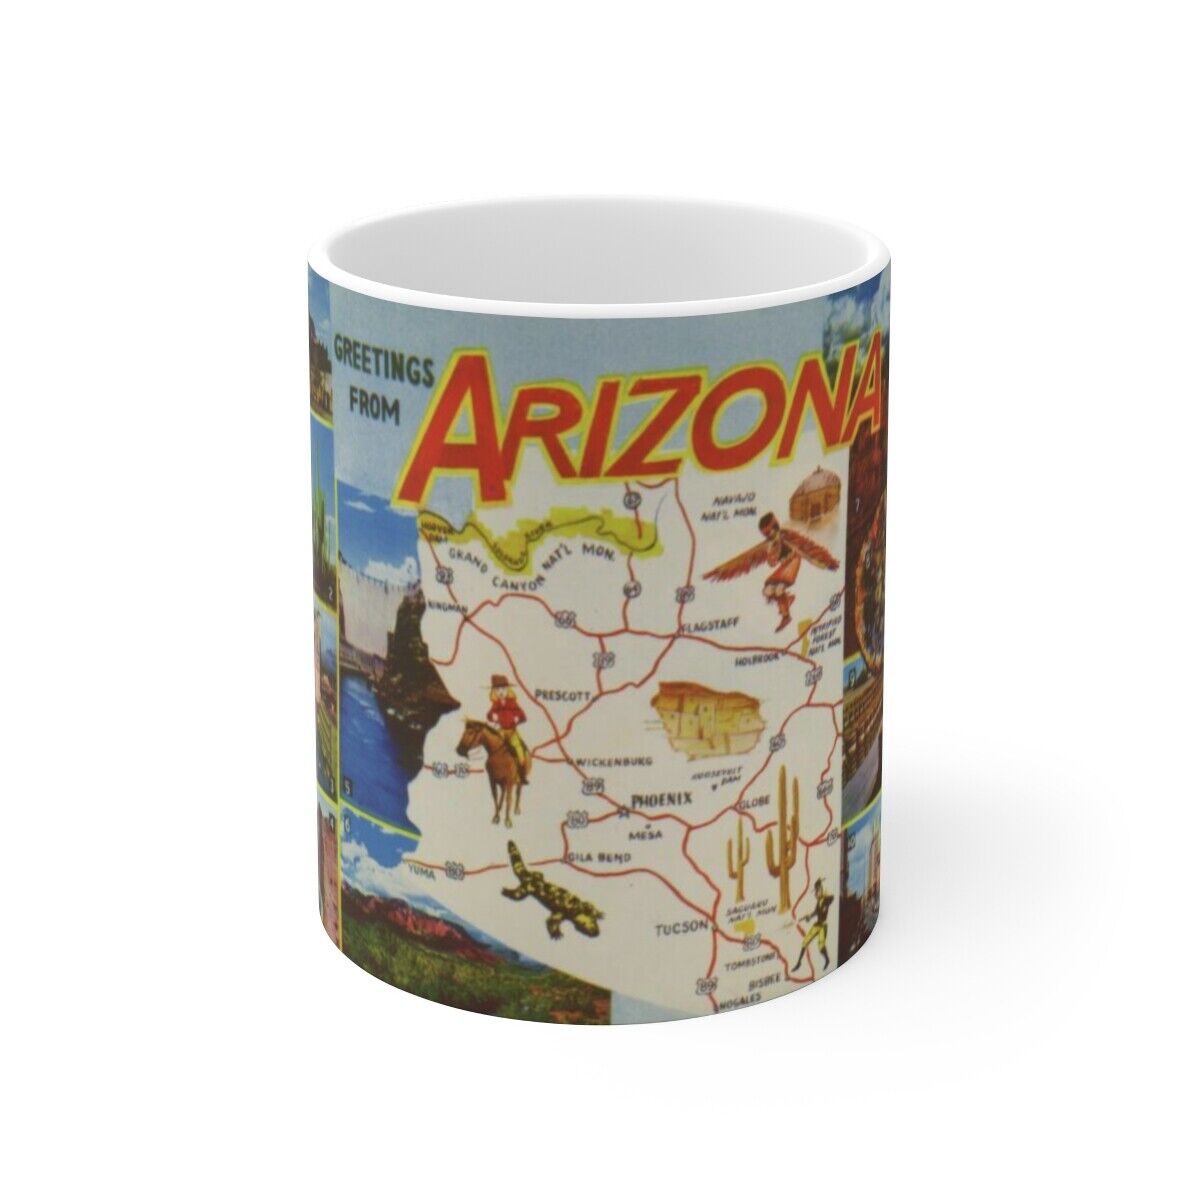 Greetings from Arizona (Greeting Postcards) White Coffee Cup